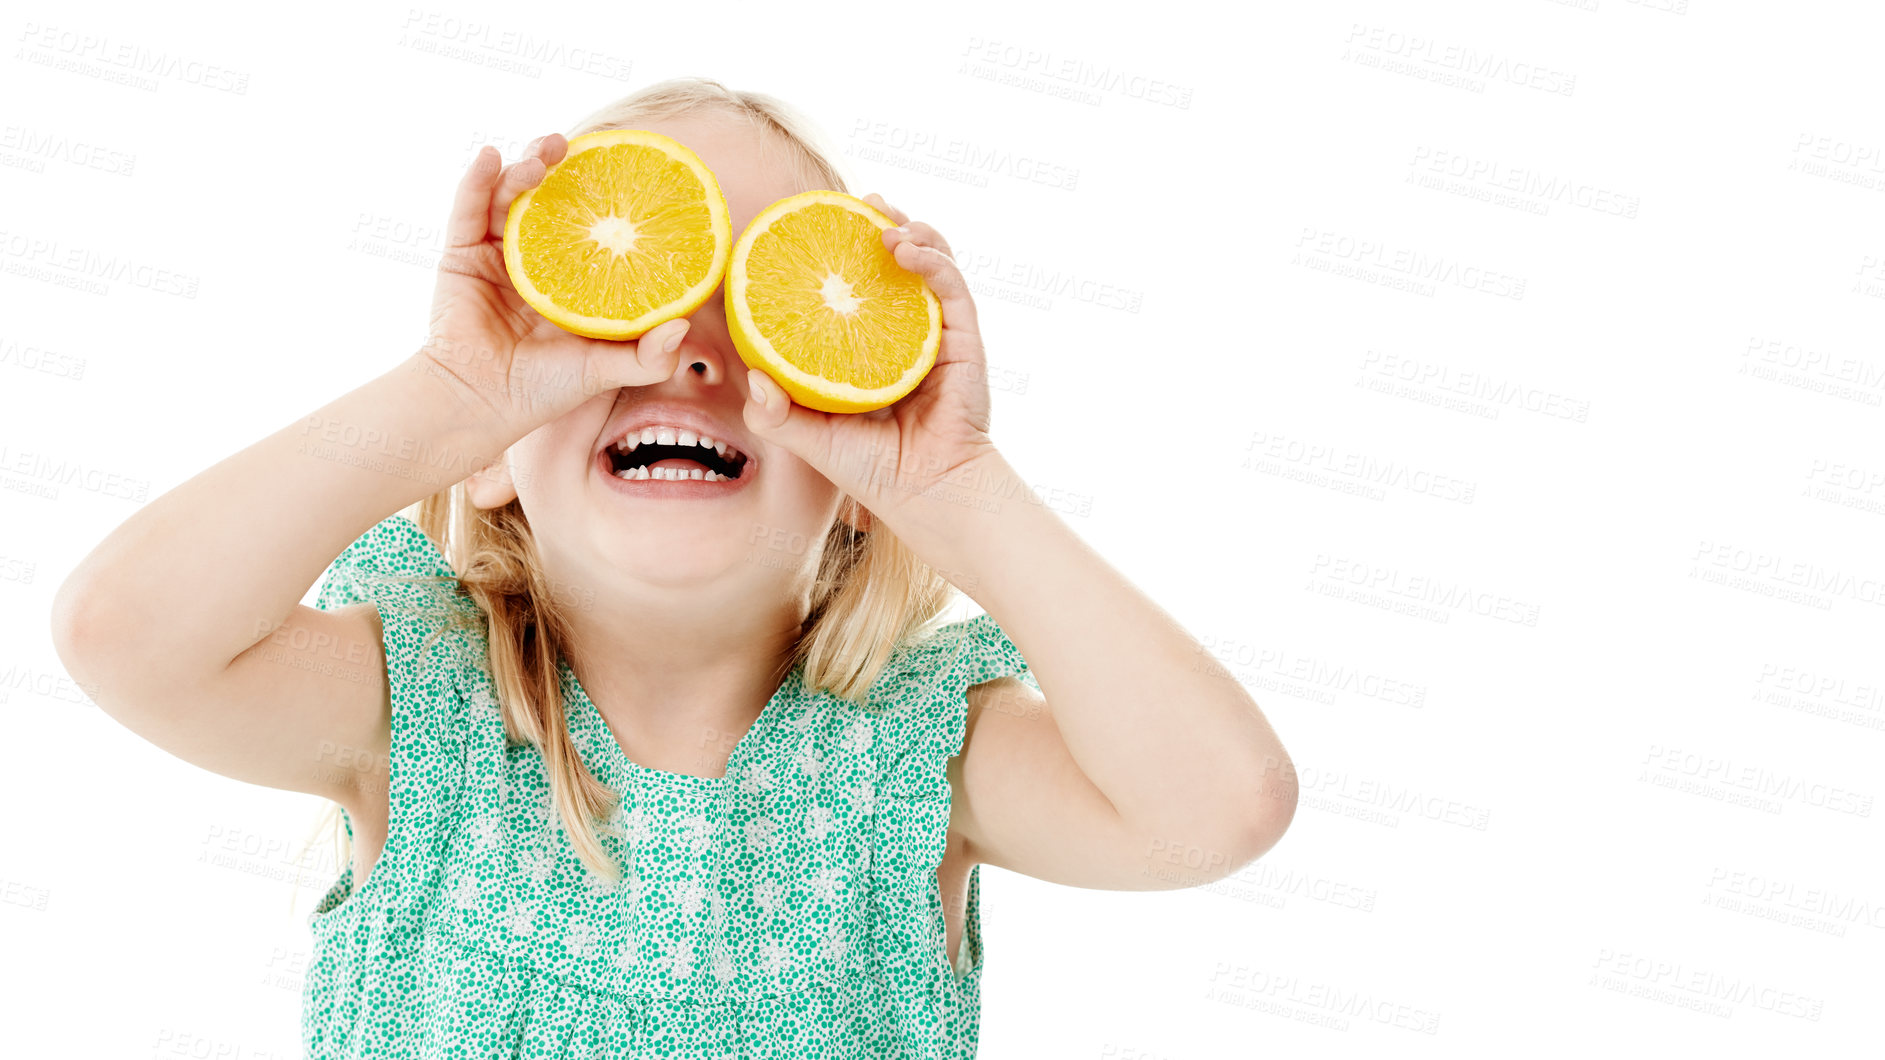 Buy stock photo Studio shot of a cute little girl playfully covering her eyes with oranges against a white background